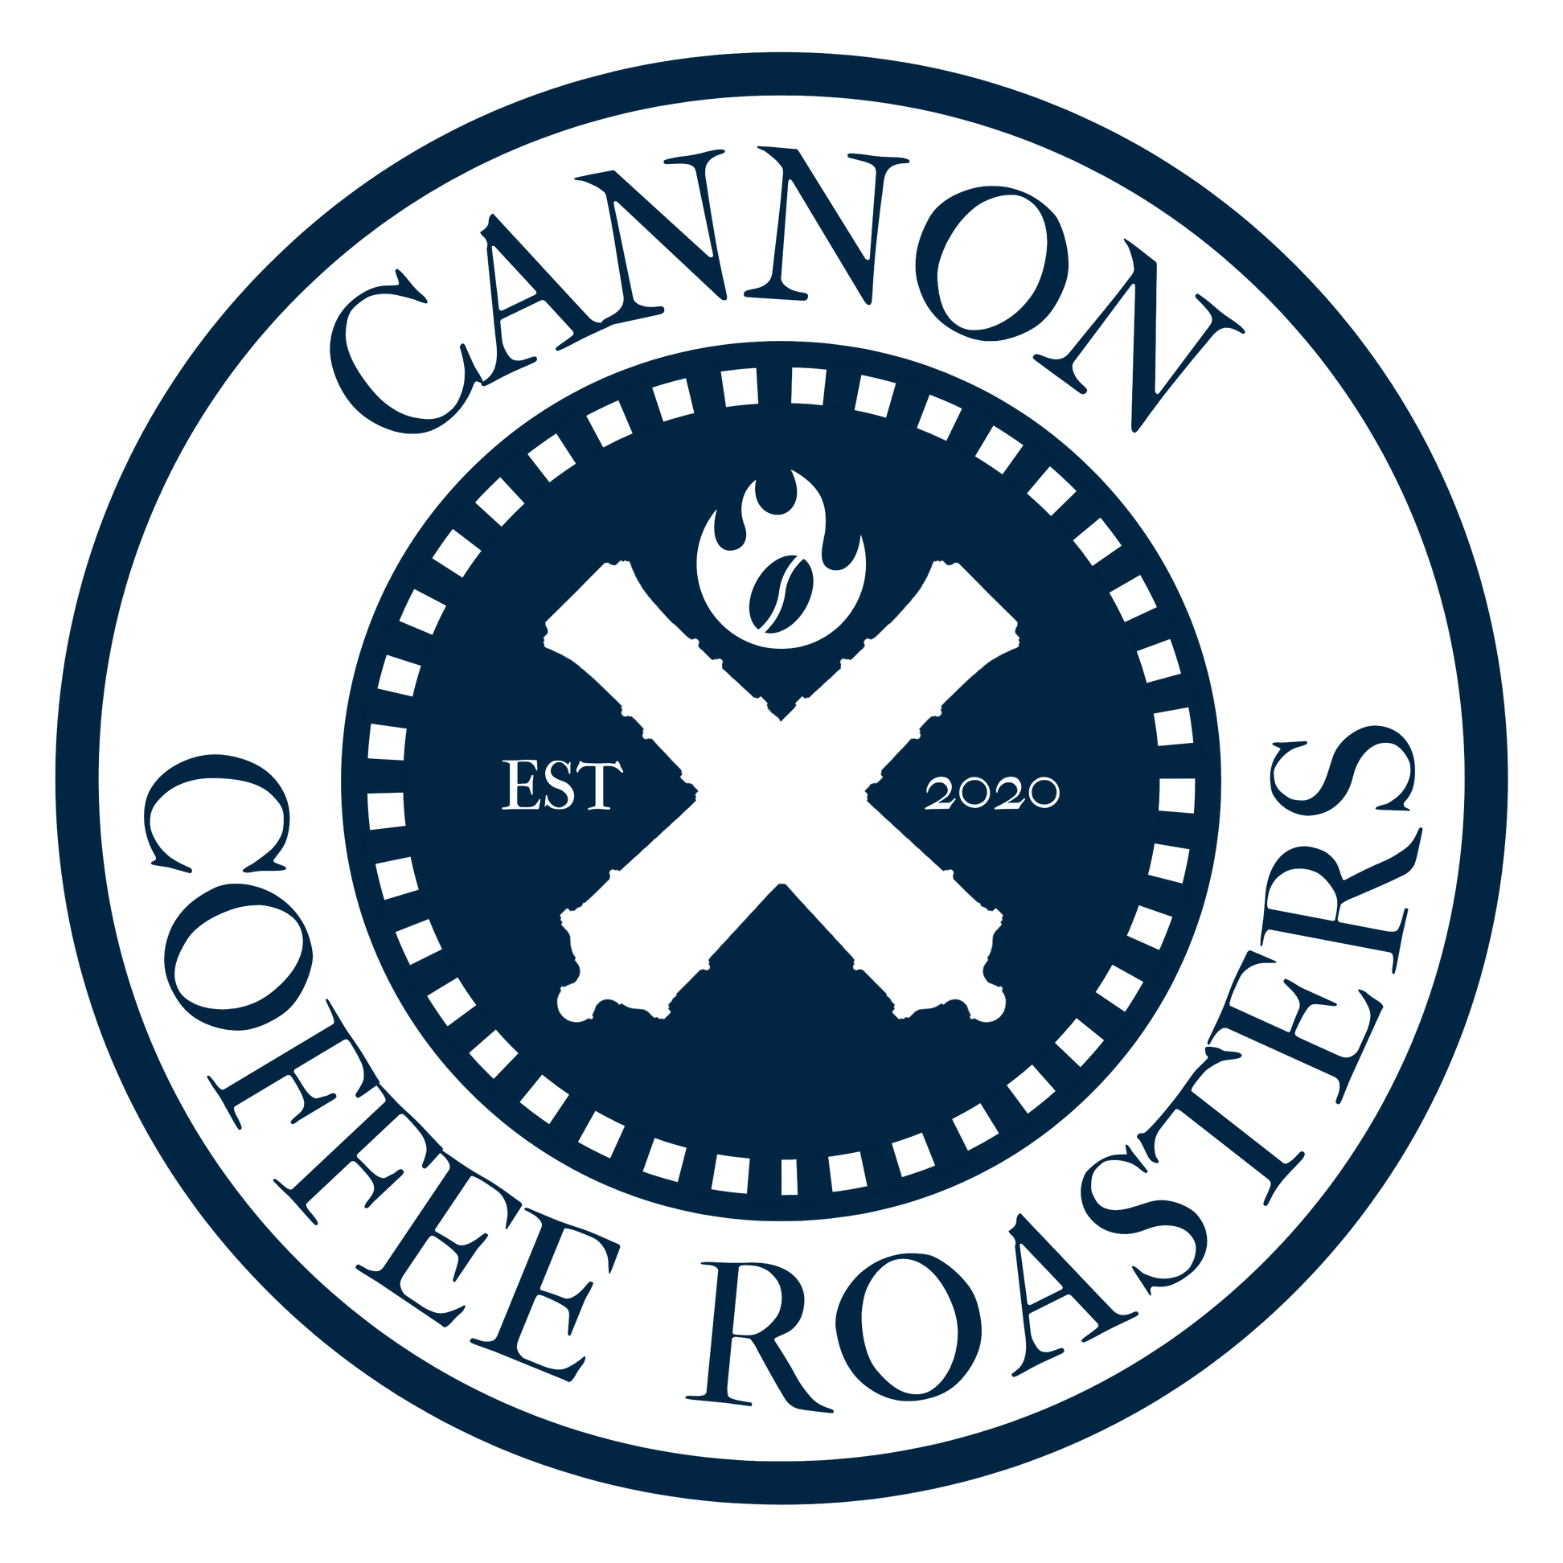 Cannon Coffee Roasters